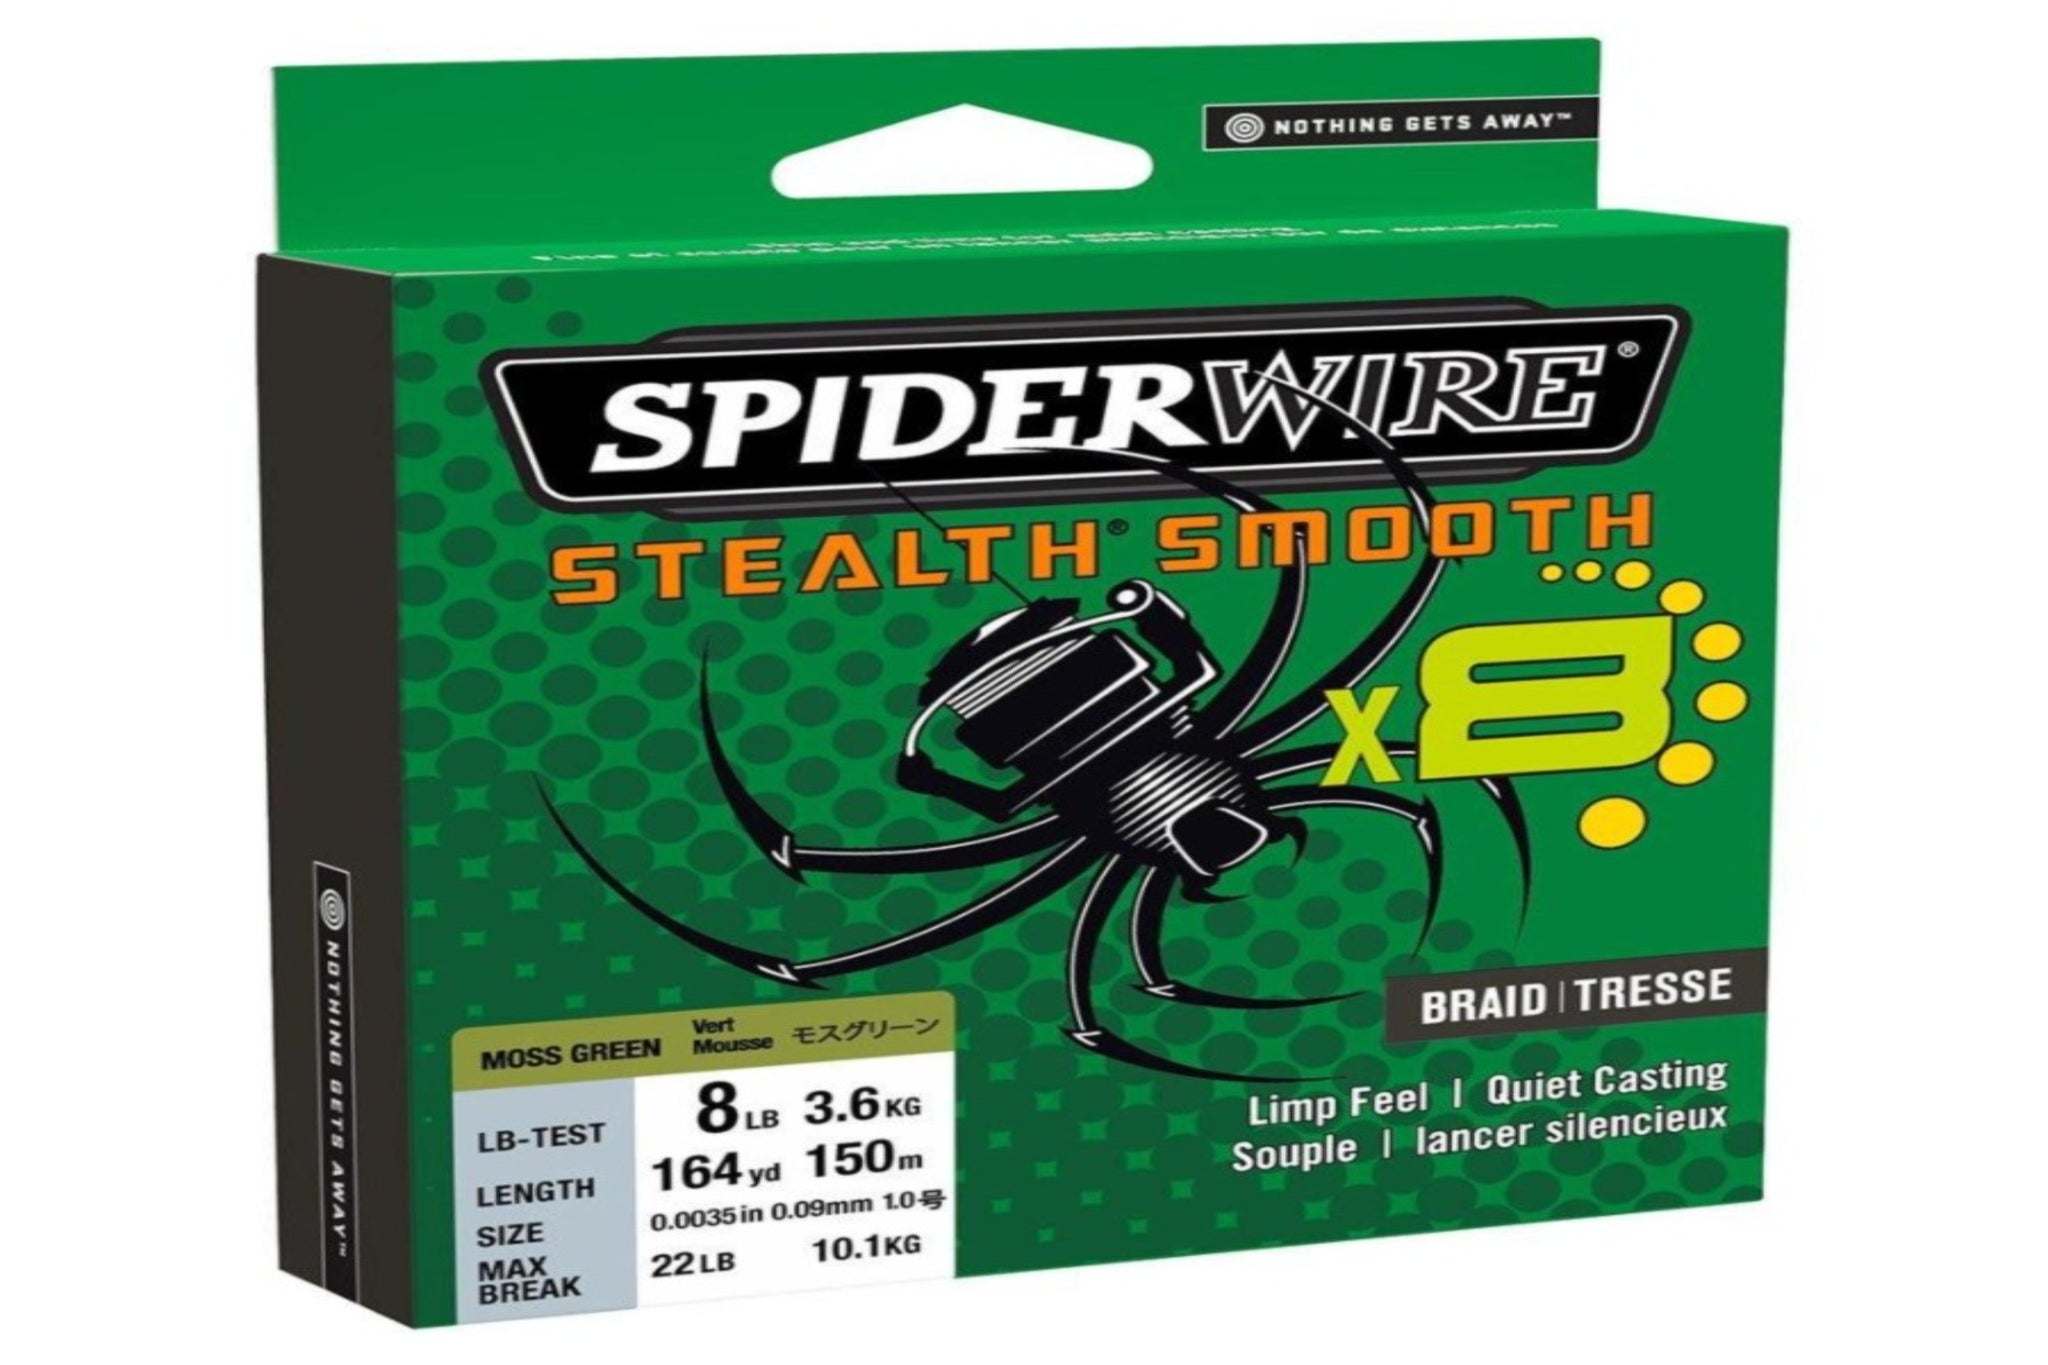 SpiderWire Stealth Smooth - The Fishing Specialist